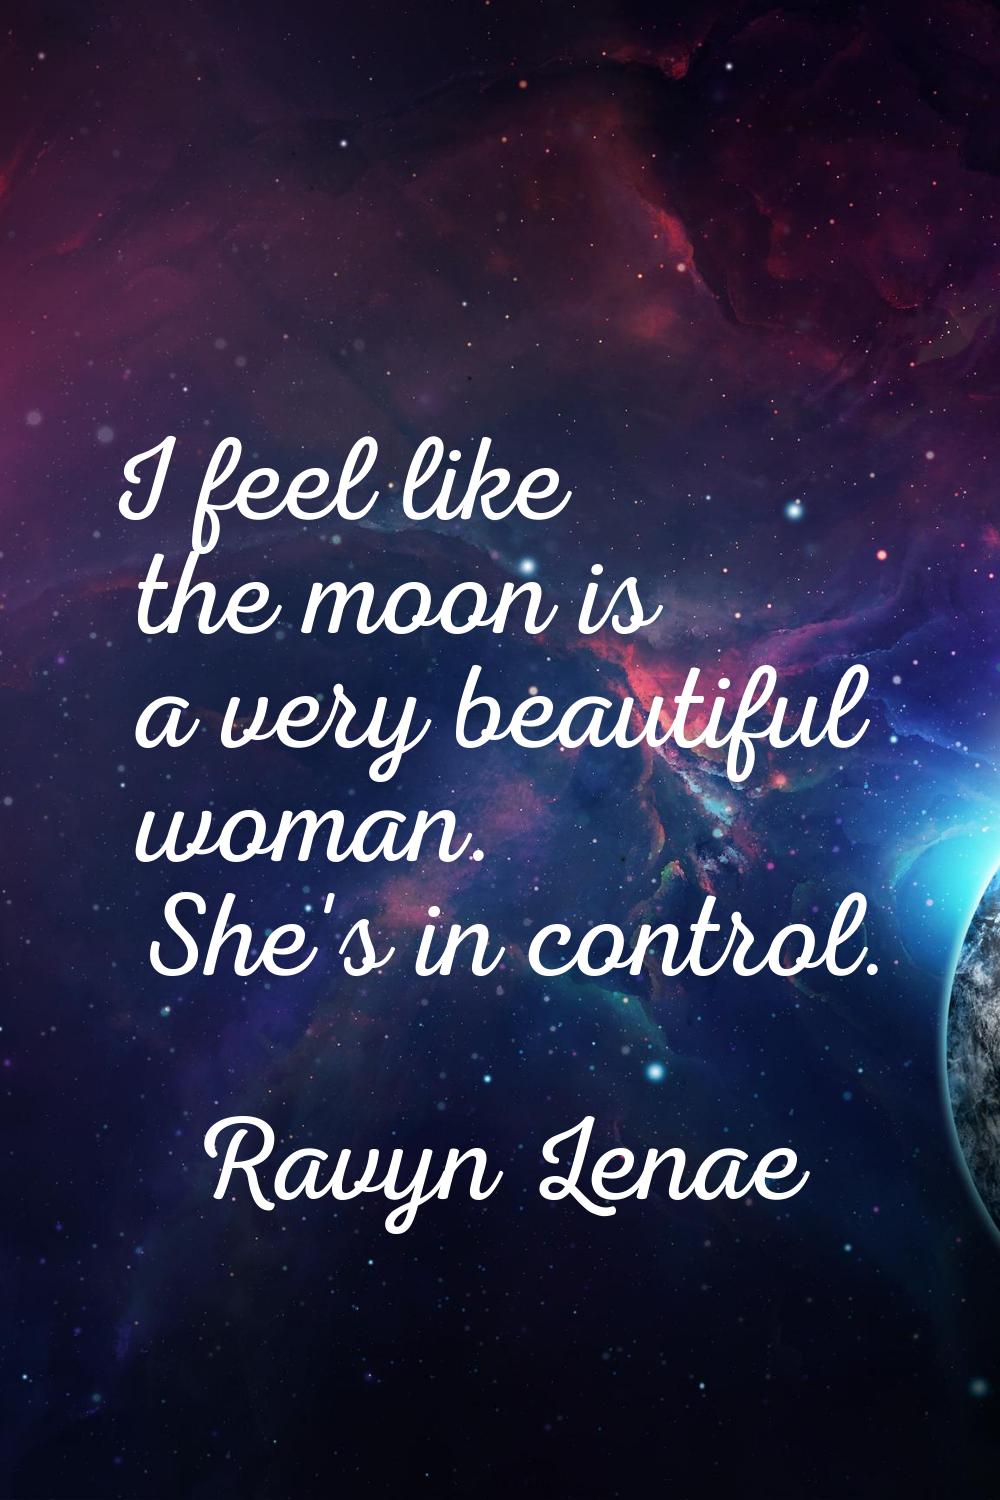 I feel like the moon is a very beautiful woman. She's in control.